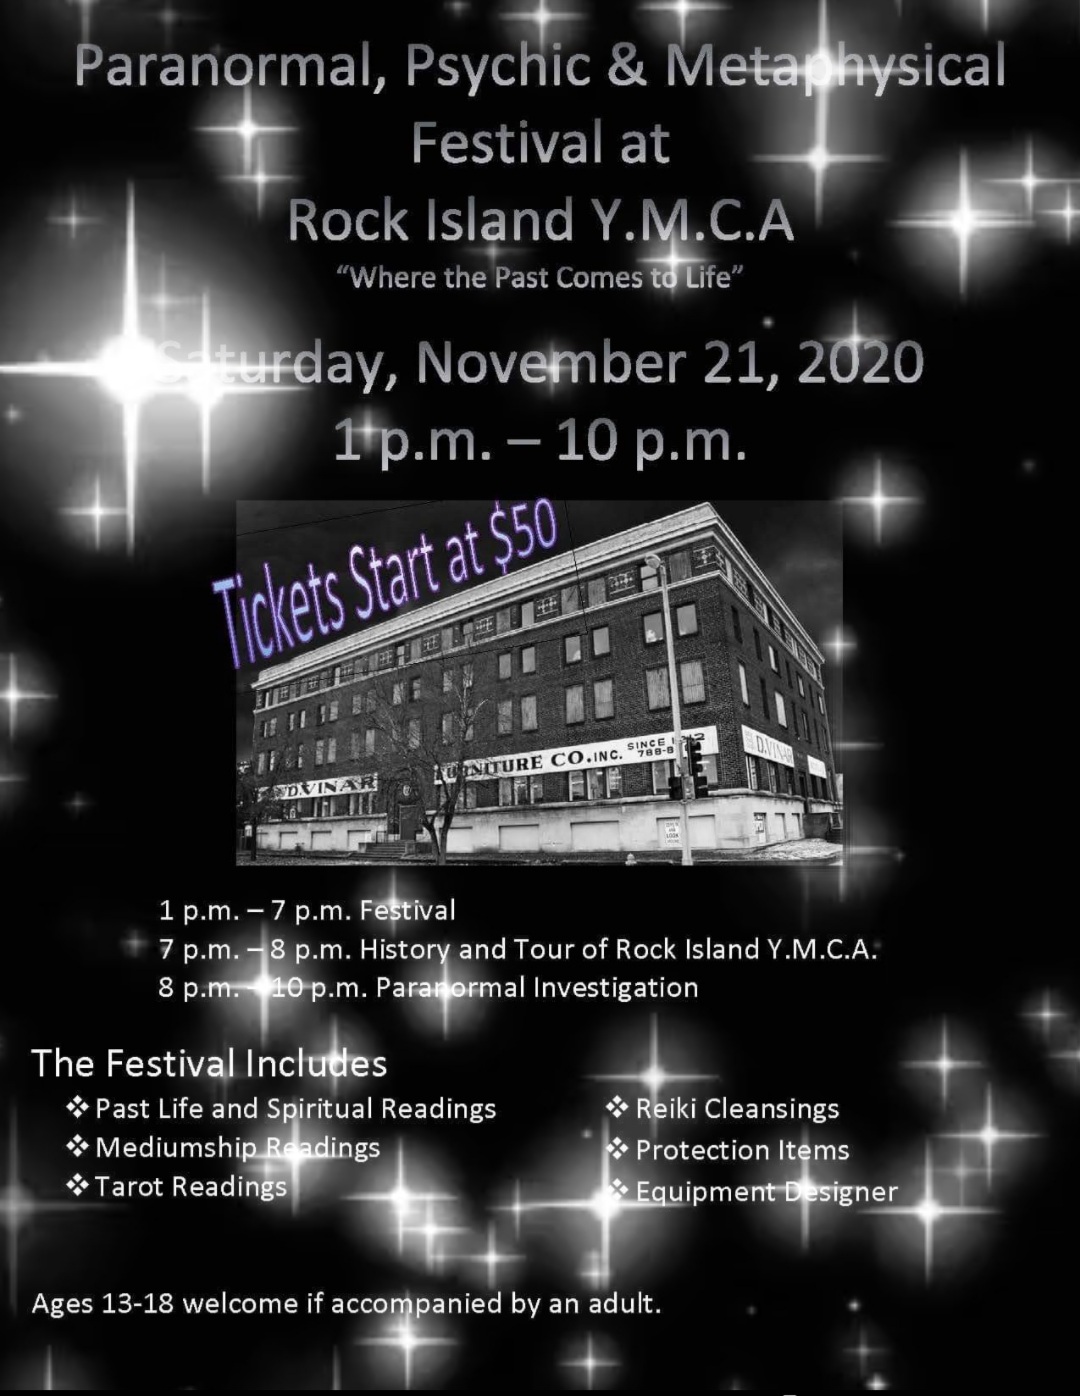 Paranormal, Psychic and Metaphysical Festival at the Rock Island YMCA, Rock Island, Illinois, United States